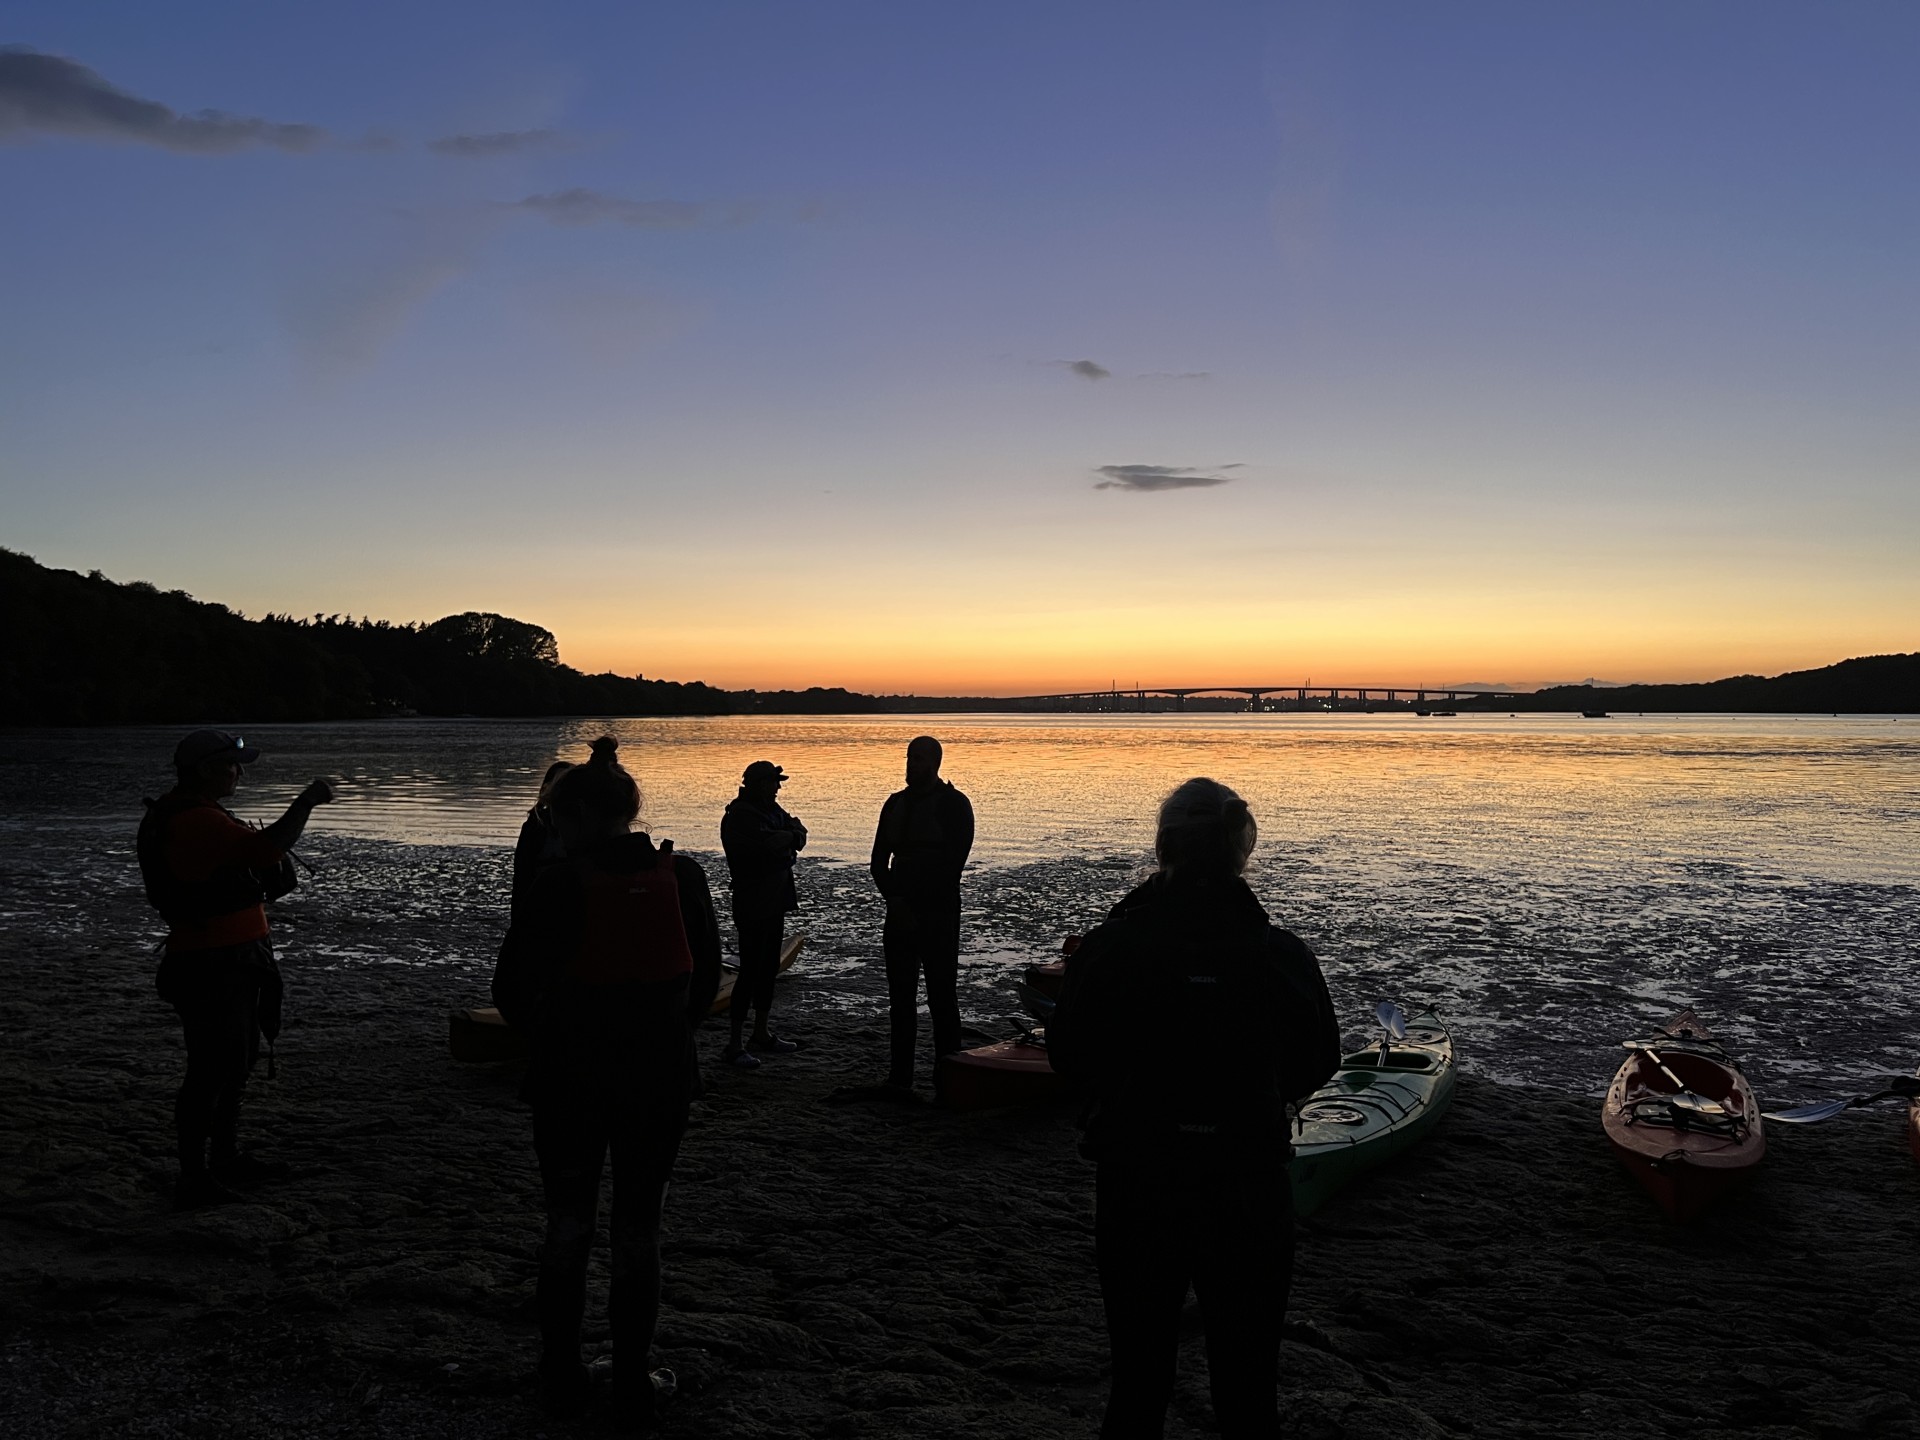 Paddlers taking a break in the evening twilight.